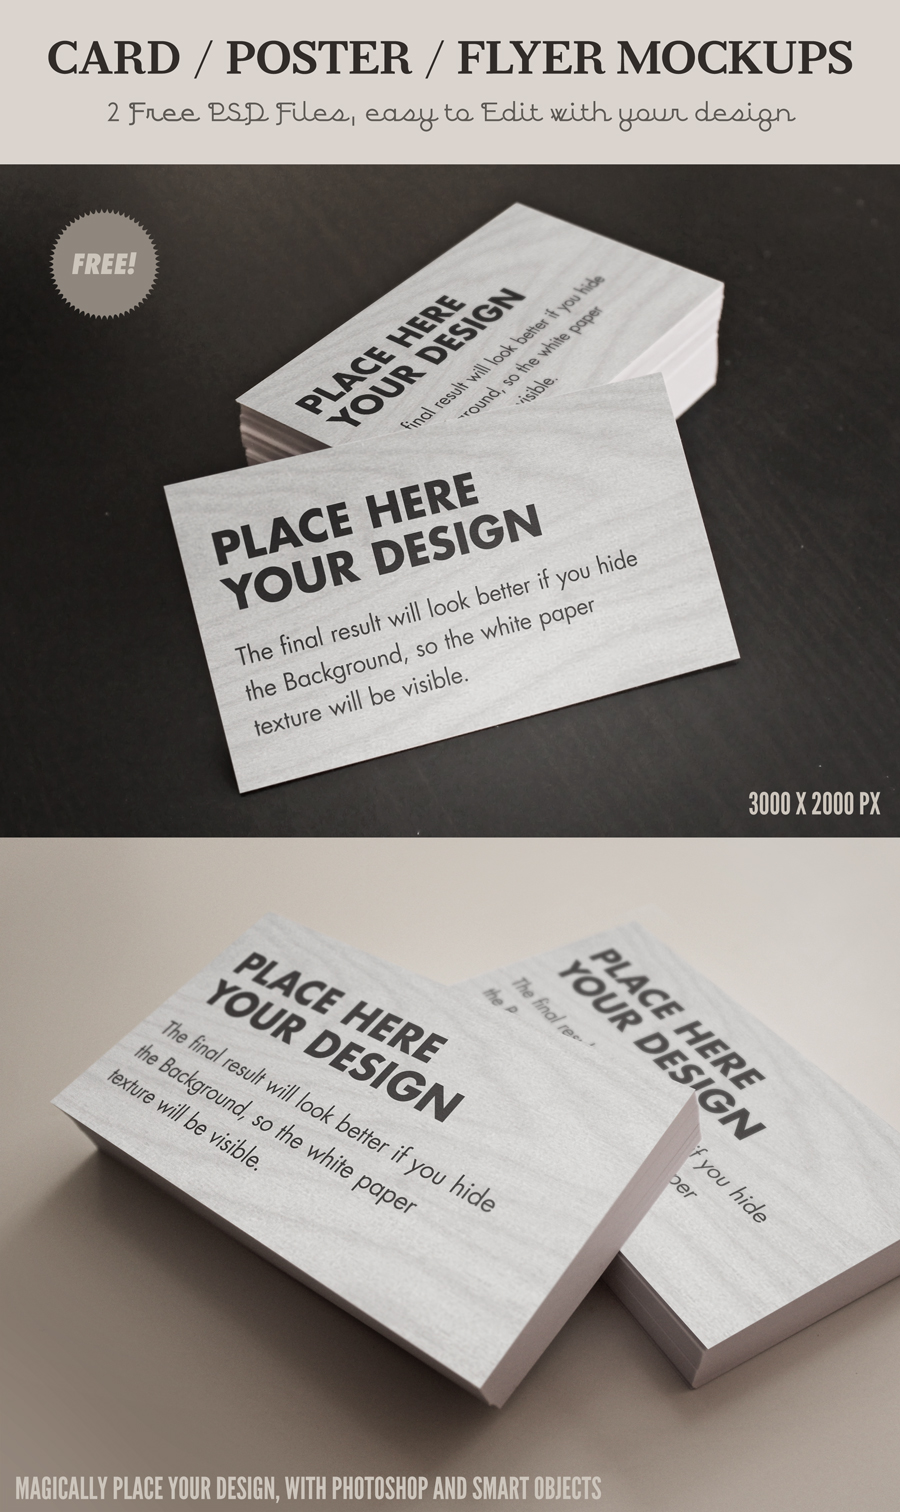 Free Card/Poster/ Flyer MockUp PSD